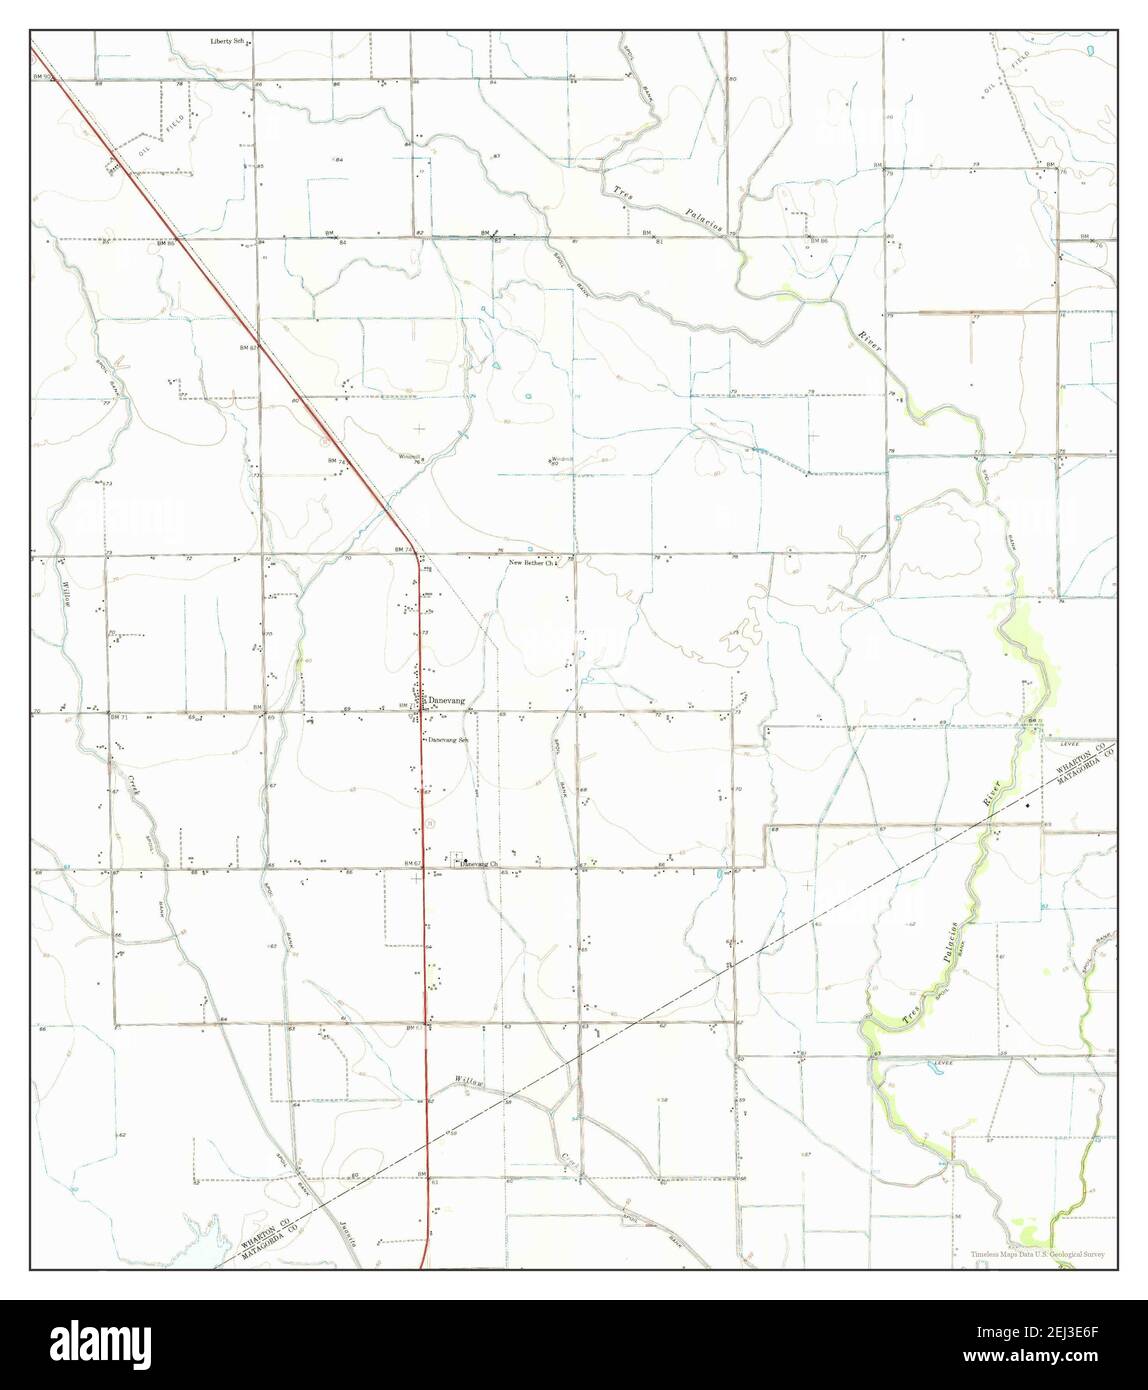 Danevang, Texas, map 1951, 1:24000, United States of America by Timeless Maps, data U.S. Geological Survey Stock Photo